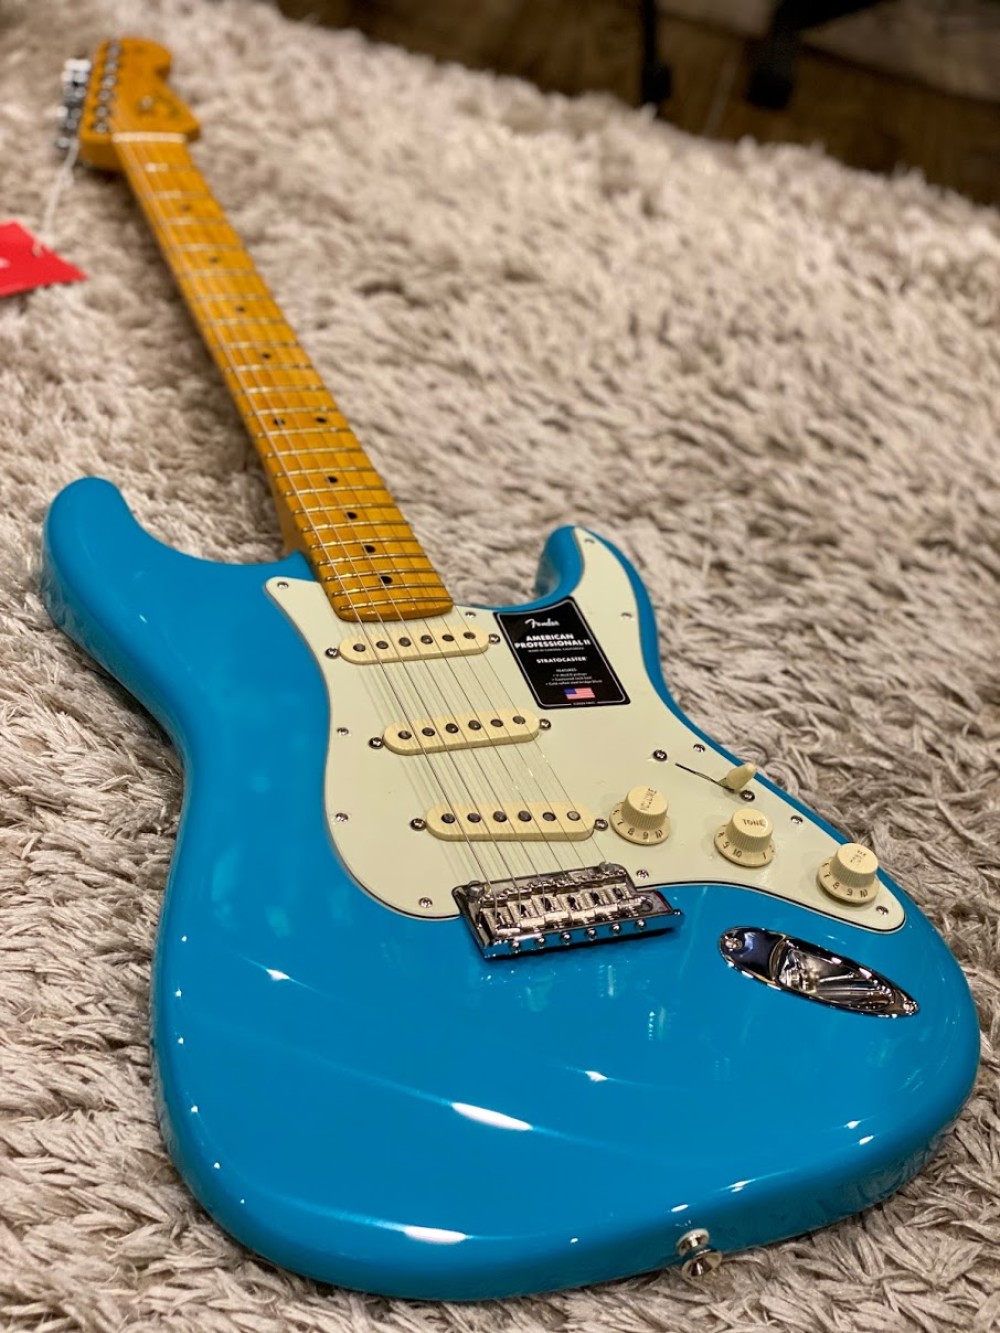 Fender American Professional II Stratocaster - Miami Blue with